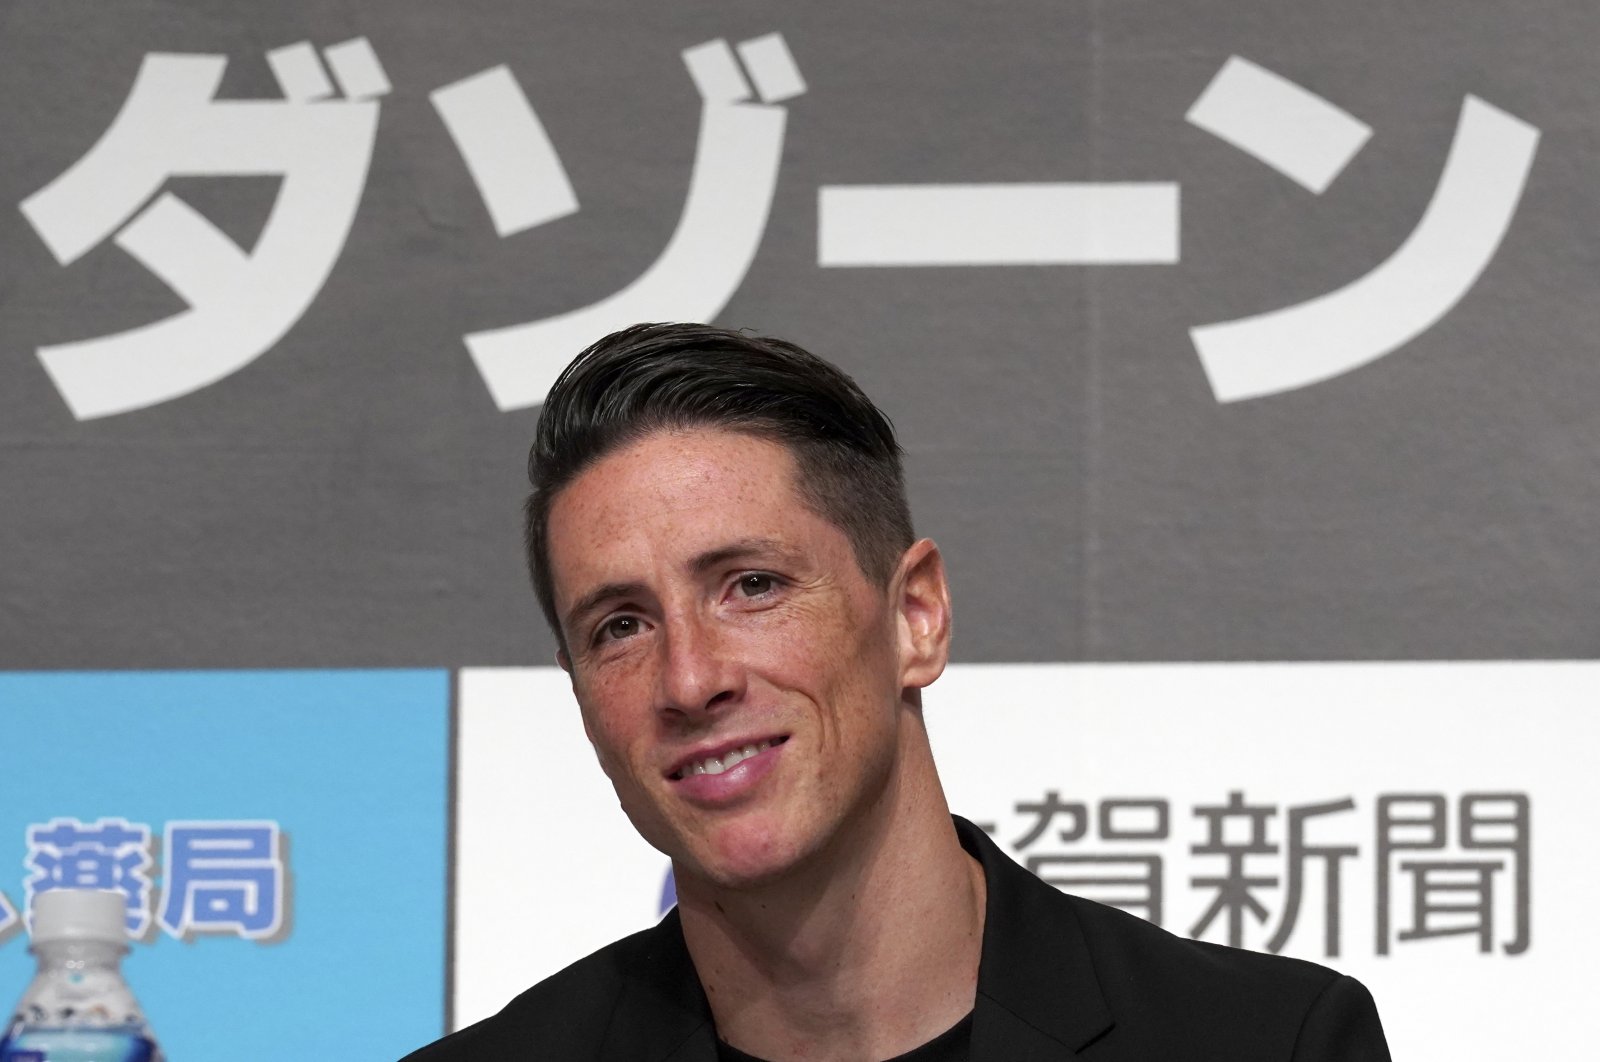 Former Spain striker Fernando Torres attends a press conference to announce his retirement in Tokyo, Japan, June 23, 2019. (AP Photo)